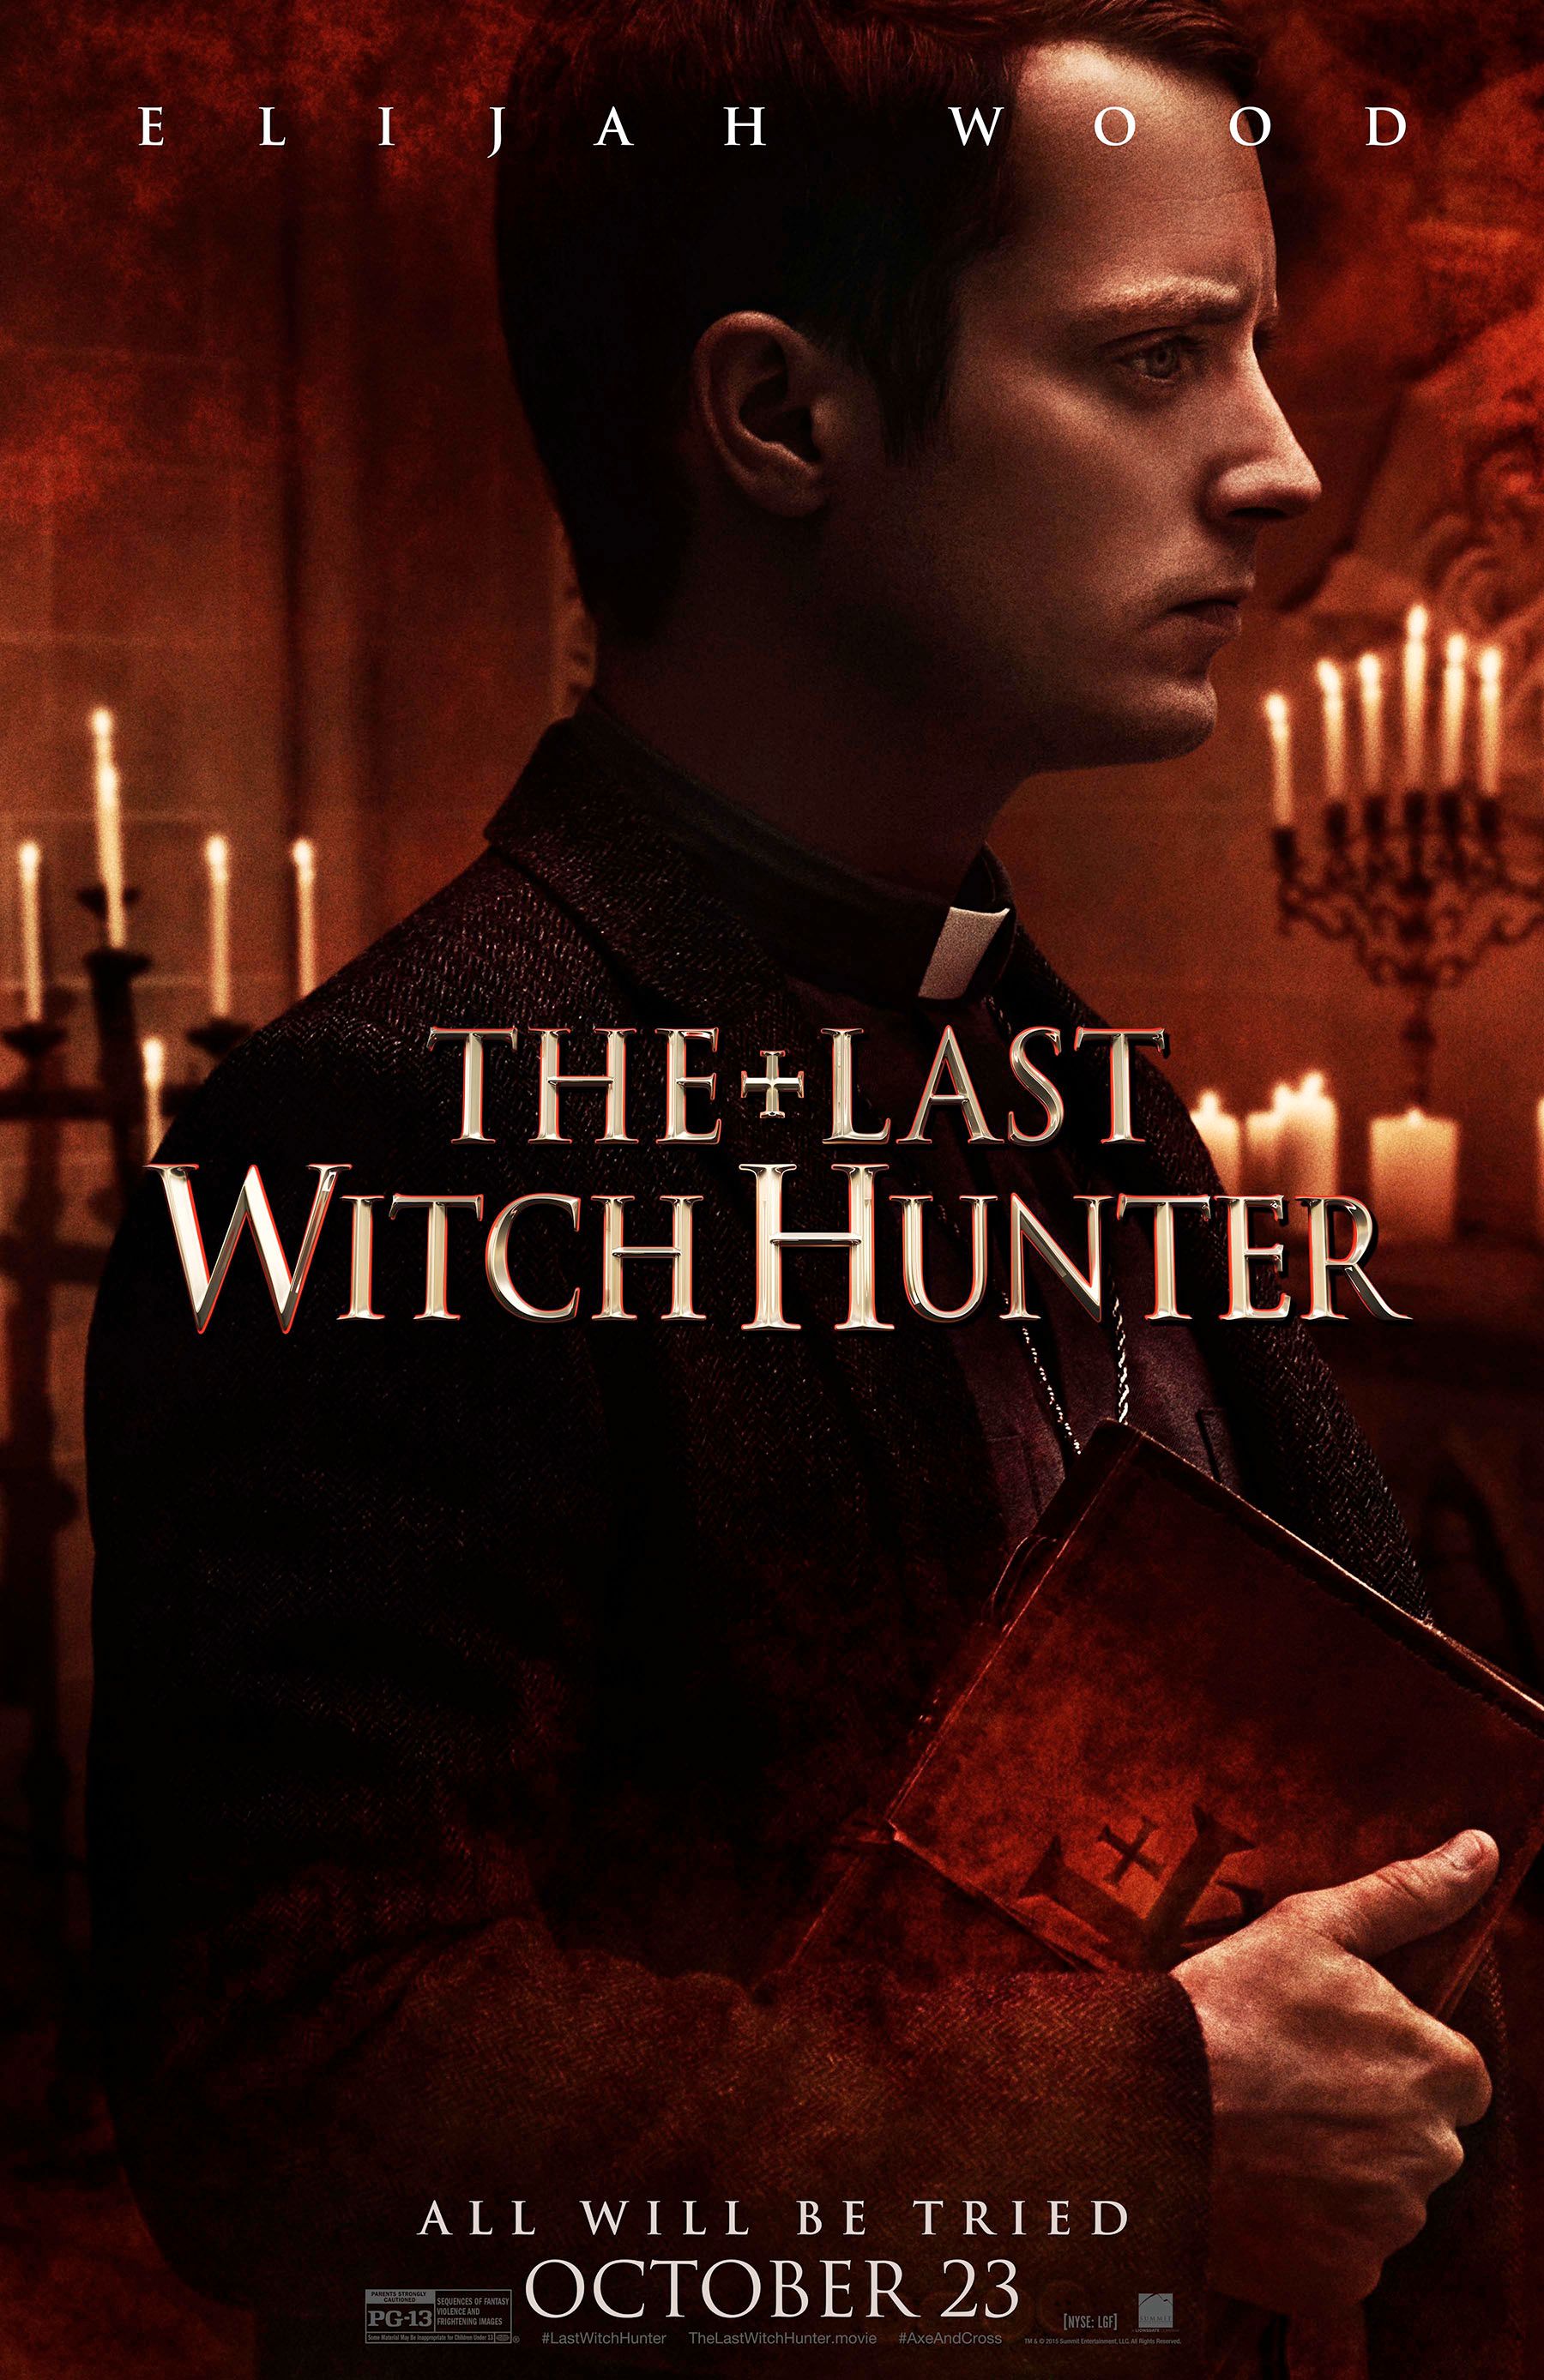 Elijah Wood - The Last Witch Hunter Character Poster